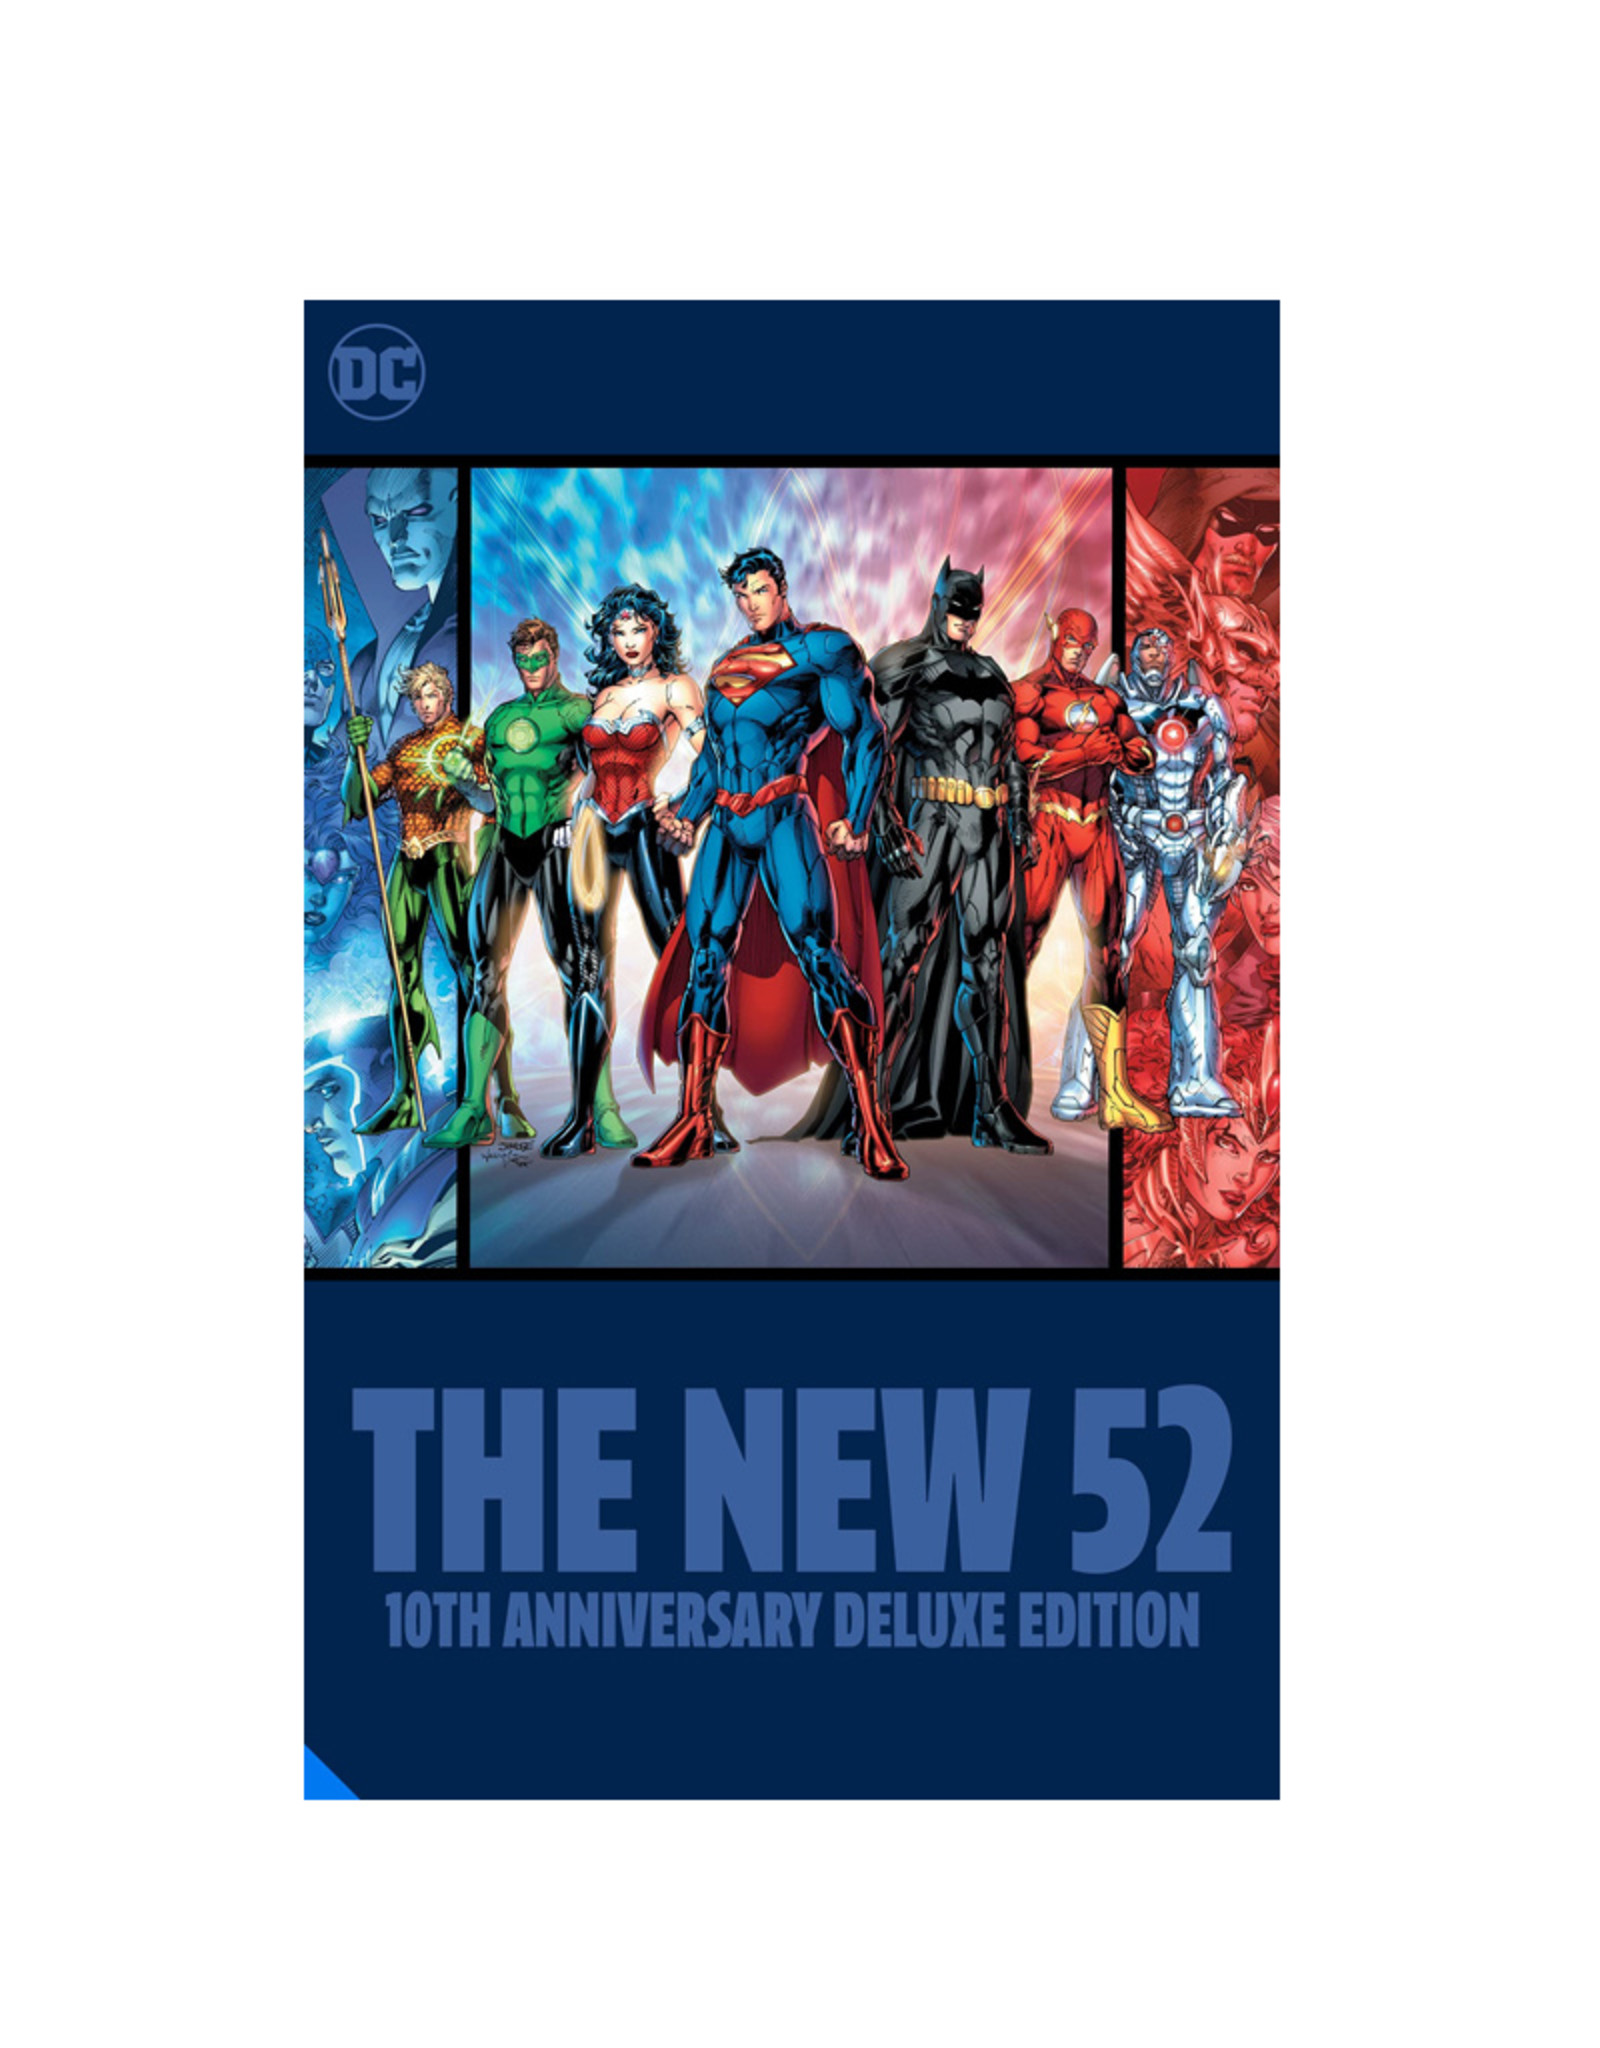 DC Comics New 52 10th Anniversary Deluxe Edition Hardcover